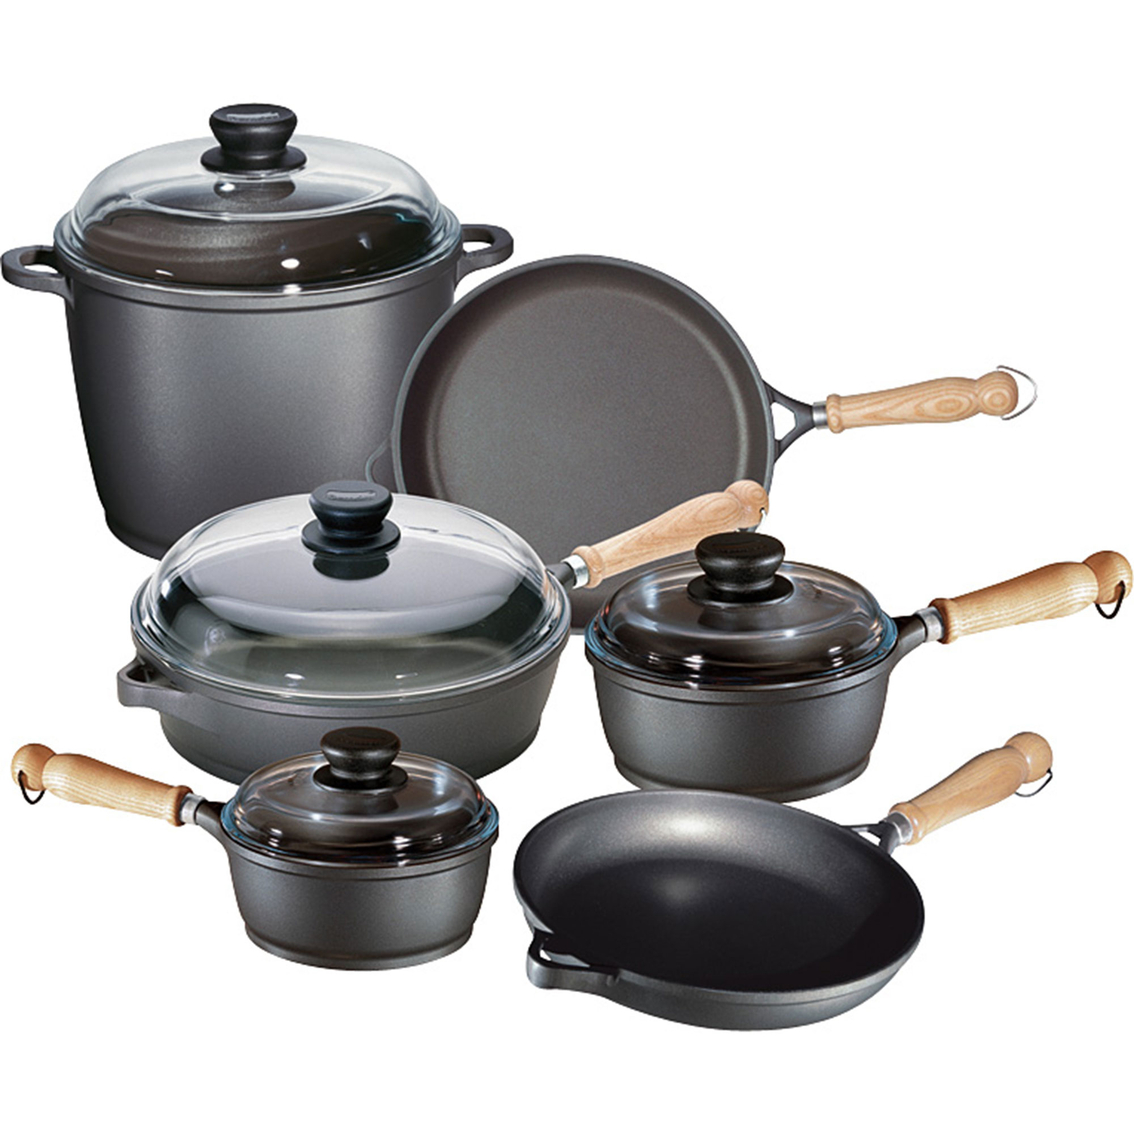 Berndes Tradition 10 Pc. Cookware Set, Non-stick, Household